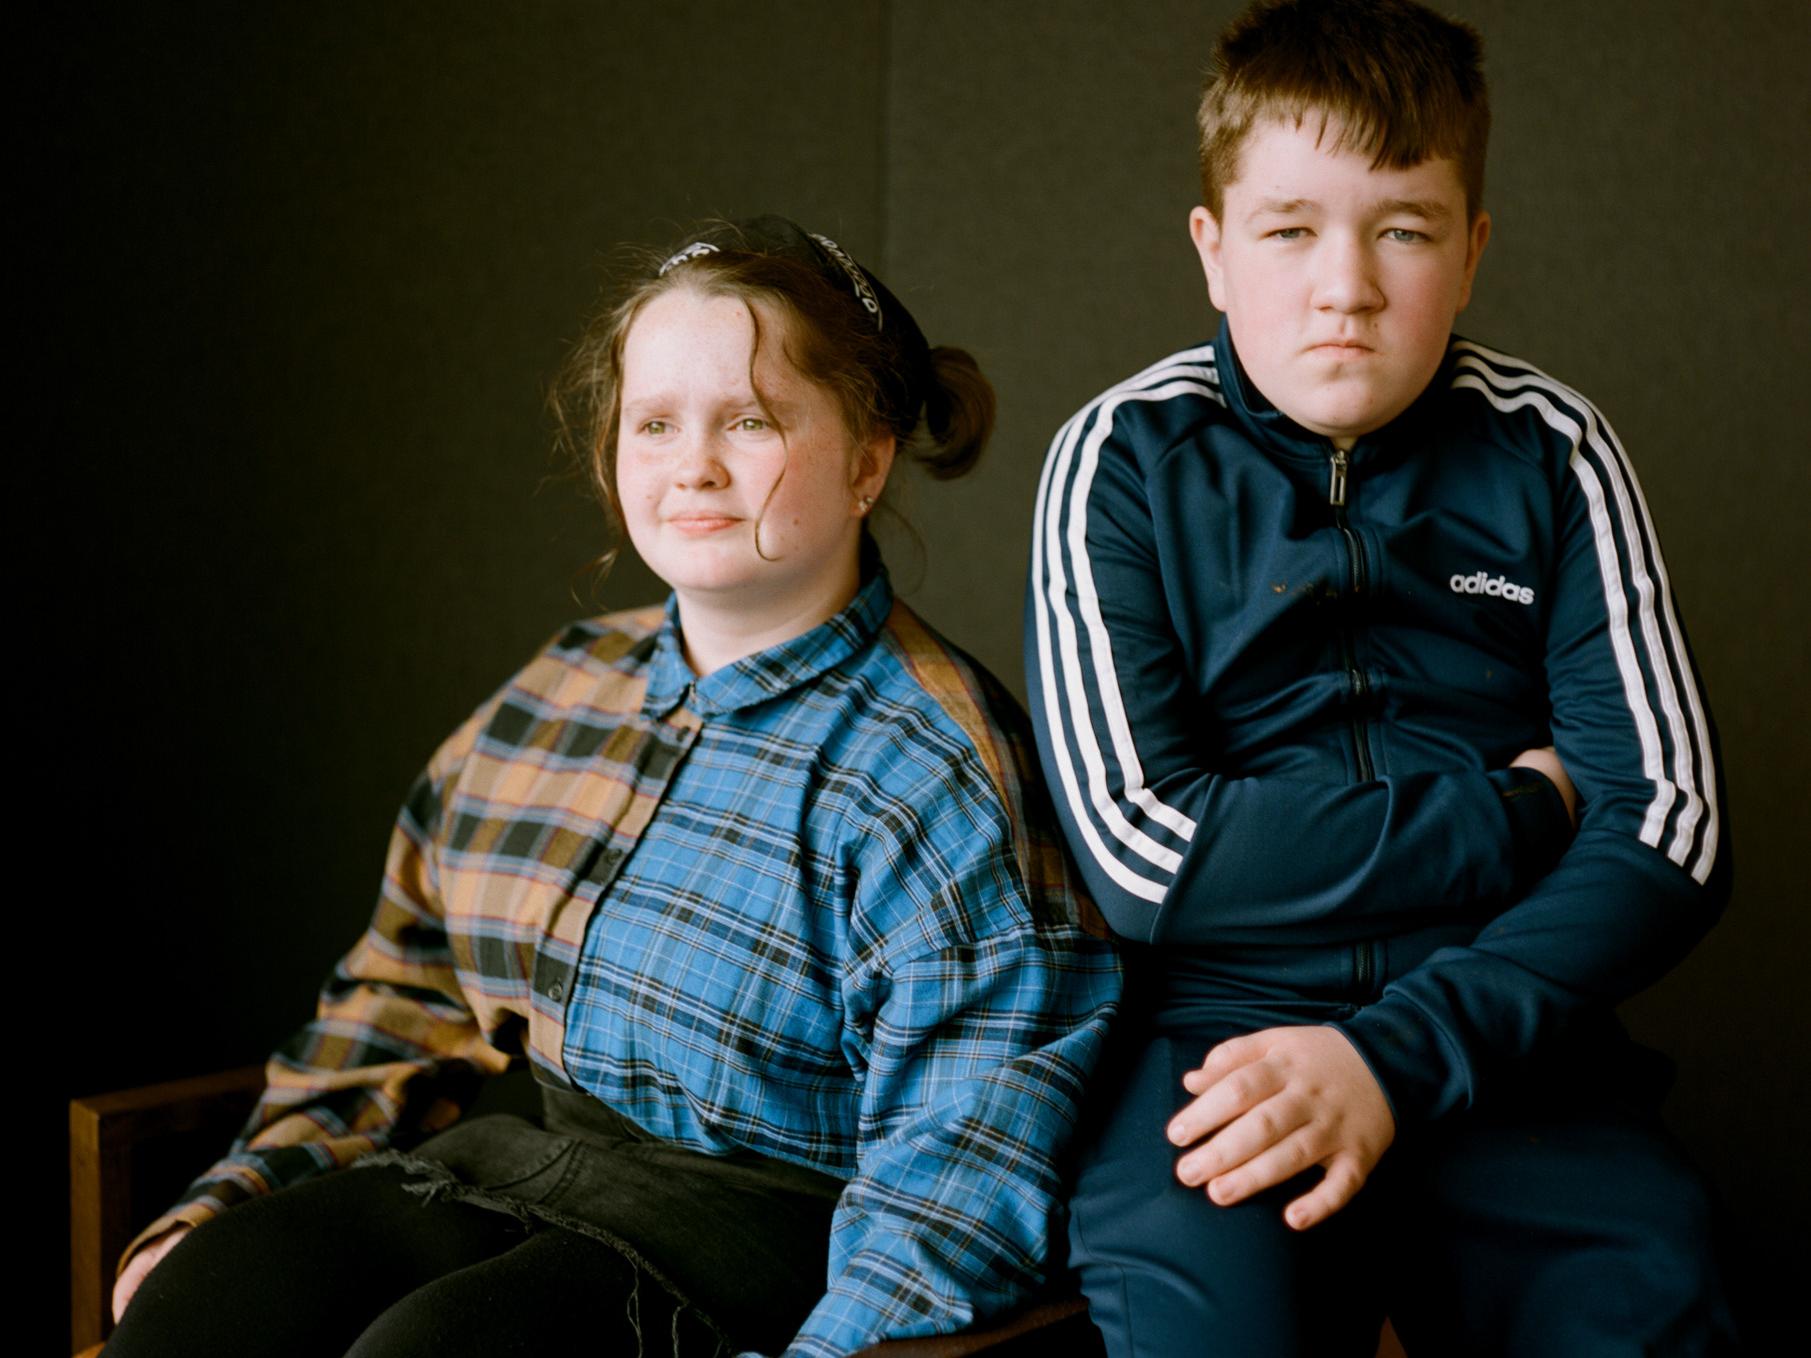 Molly, 13, and Connor, 11, from the Bolton Lads & Girls Club sitting and looking at the camera